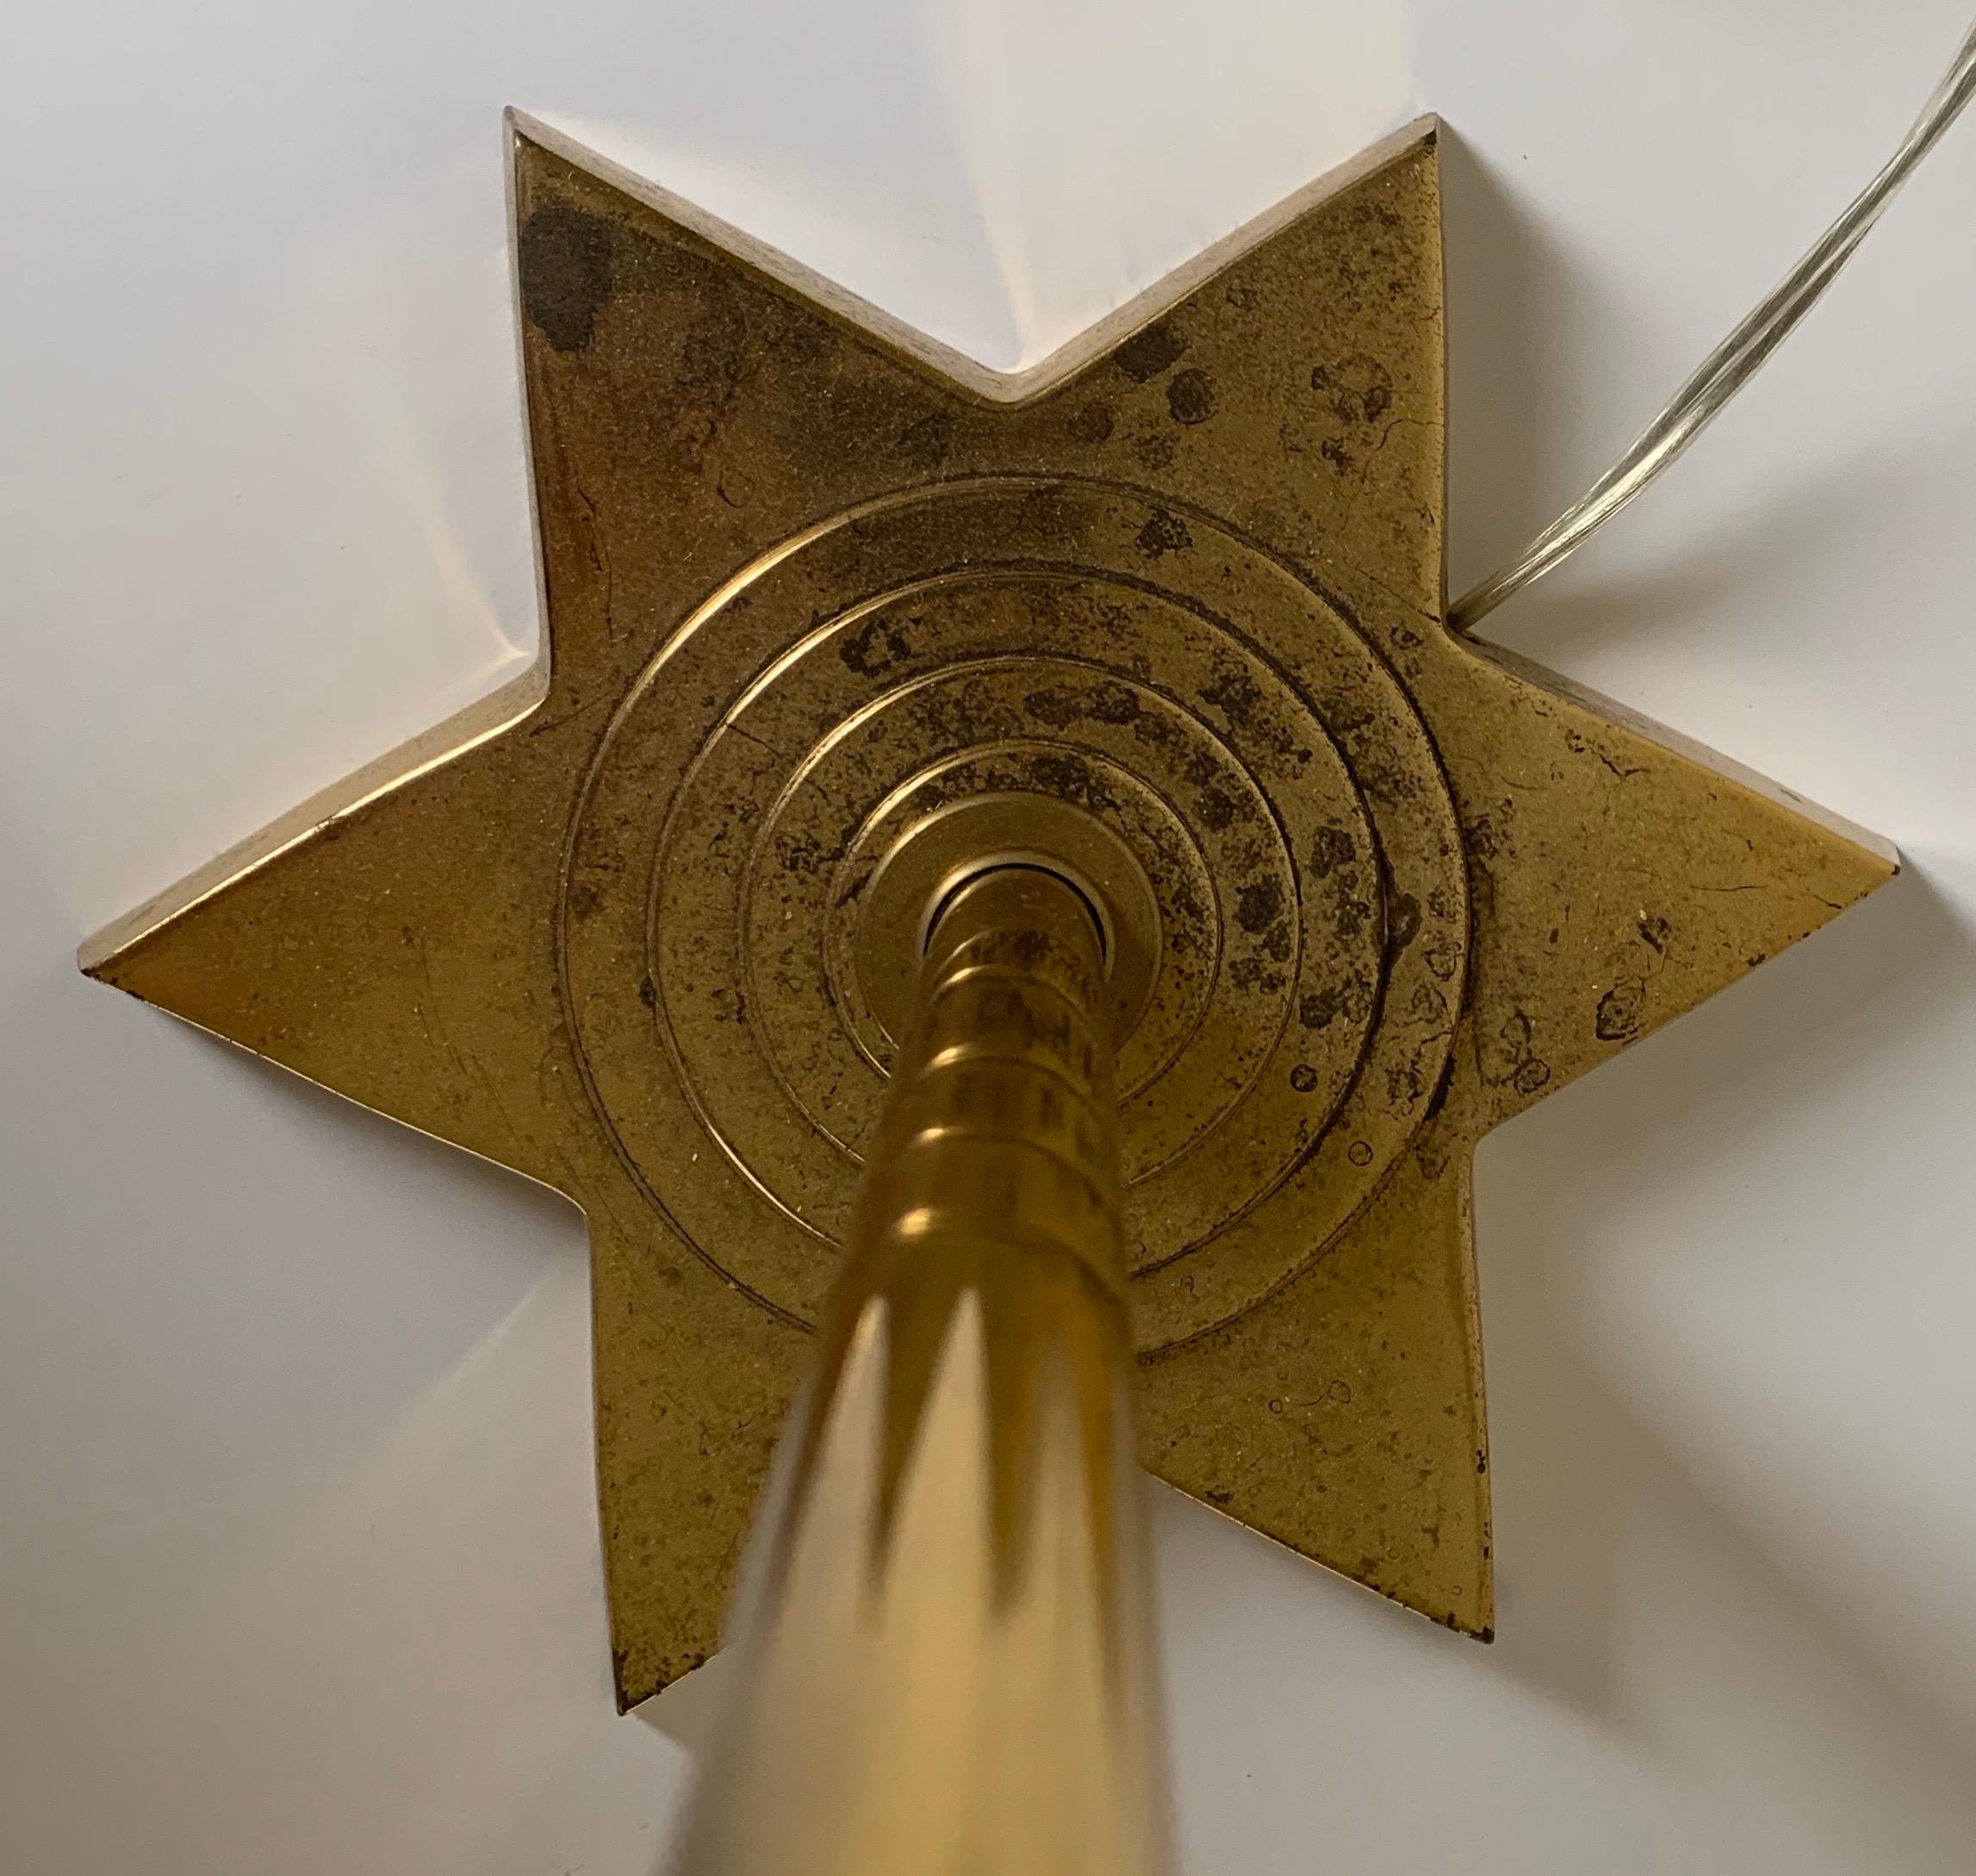 Tall solid brass floor lamp with star motif base. Newly rewired, lamp takes one standard bulb (not included). Includes harp/finial and pleated cream linen lampshade.